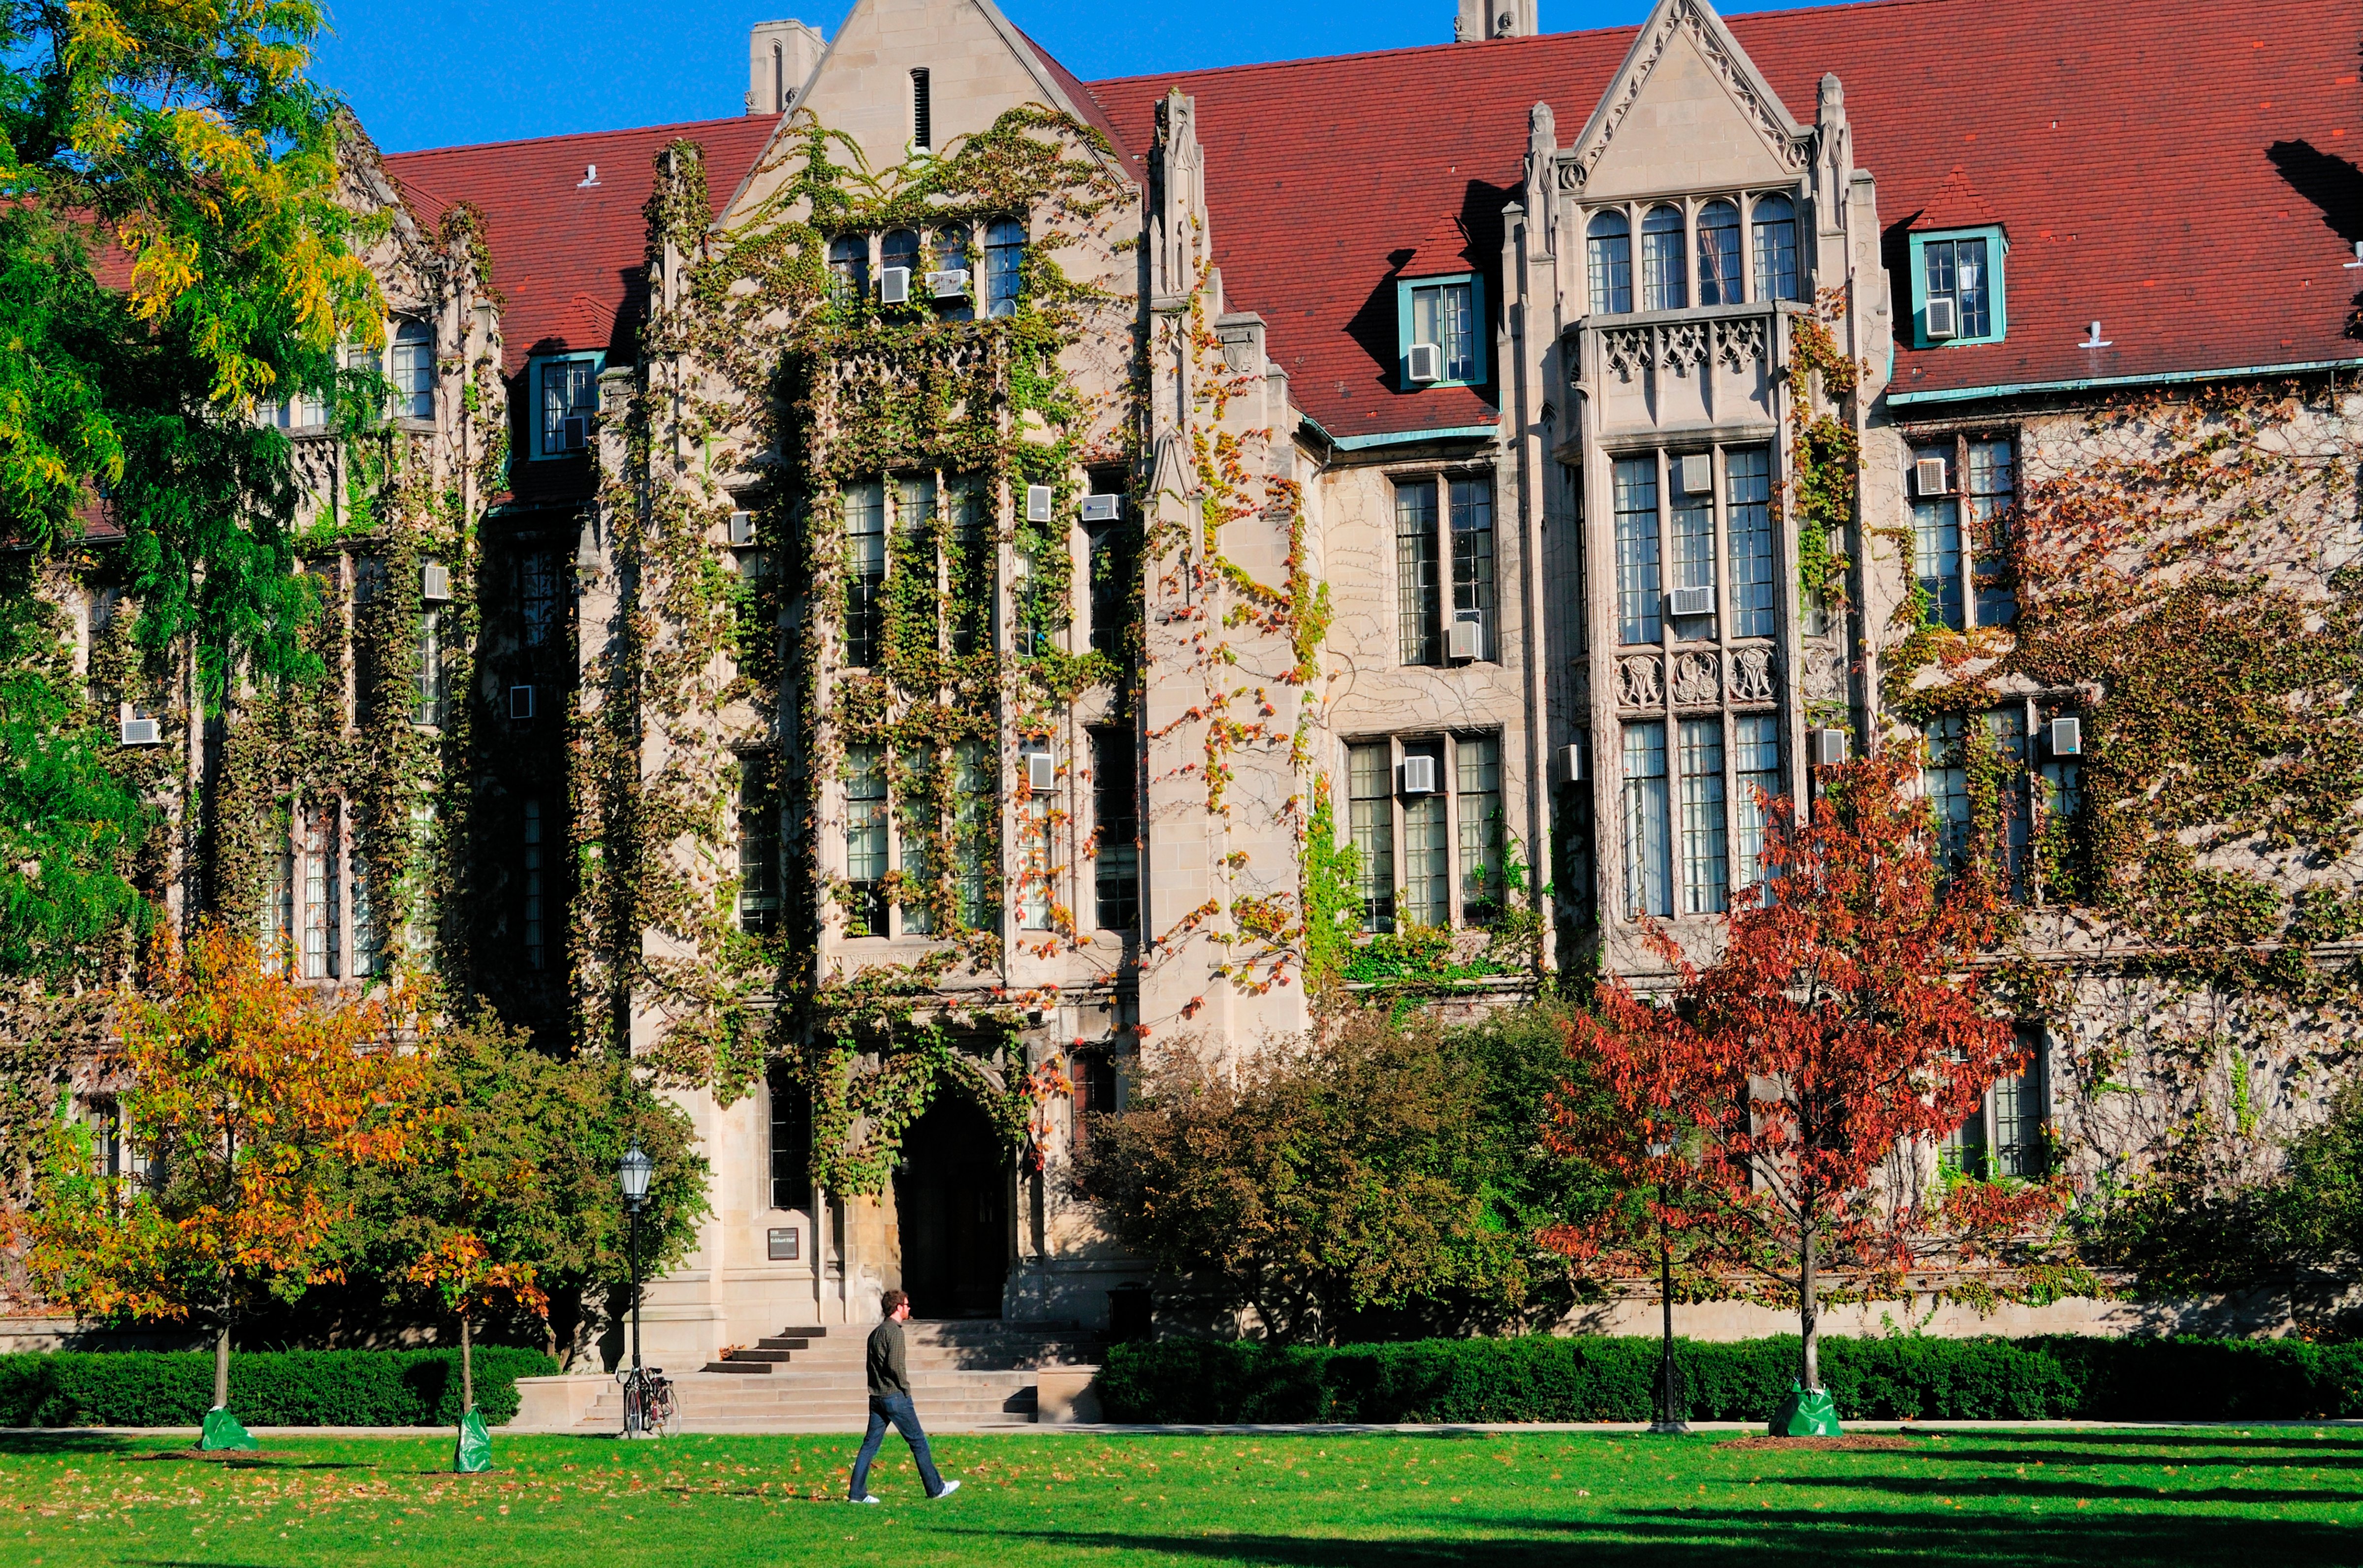 A student cust across the quadrangle in front of Eckhart Hall on the campus of the University of Chicago. Chicago, Illinois. (Getty Images)